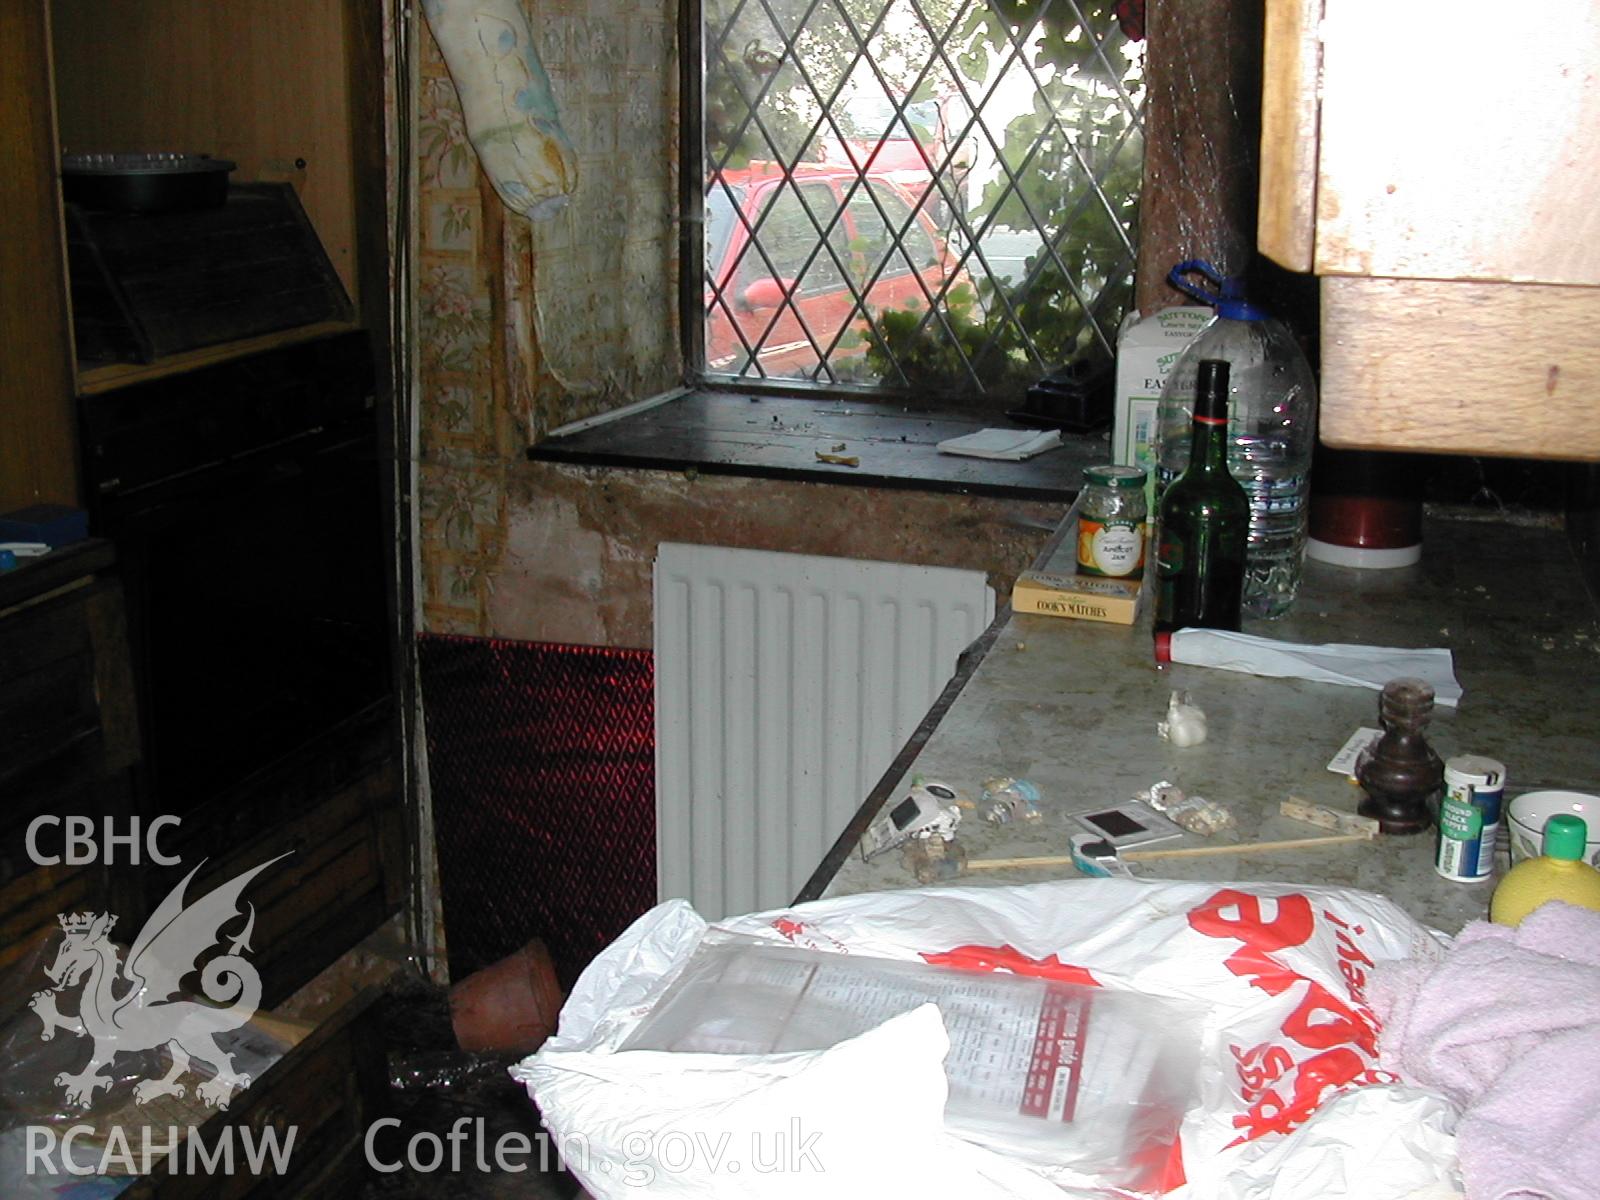 Colour photograph showing detailed interior view of kitchen at Rosacre, Gronant, Prestatyn. Unknown date. Donated by the Conservation Department of Flintshire County Council, in advance of relocation to new offices.